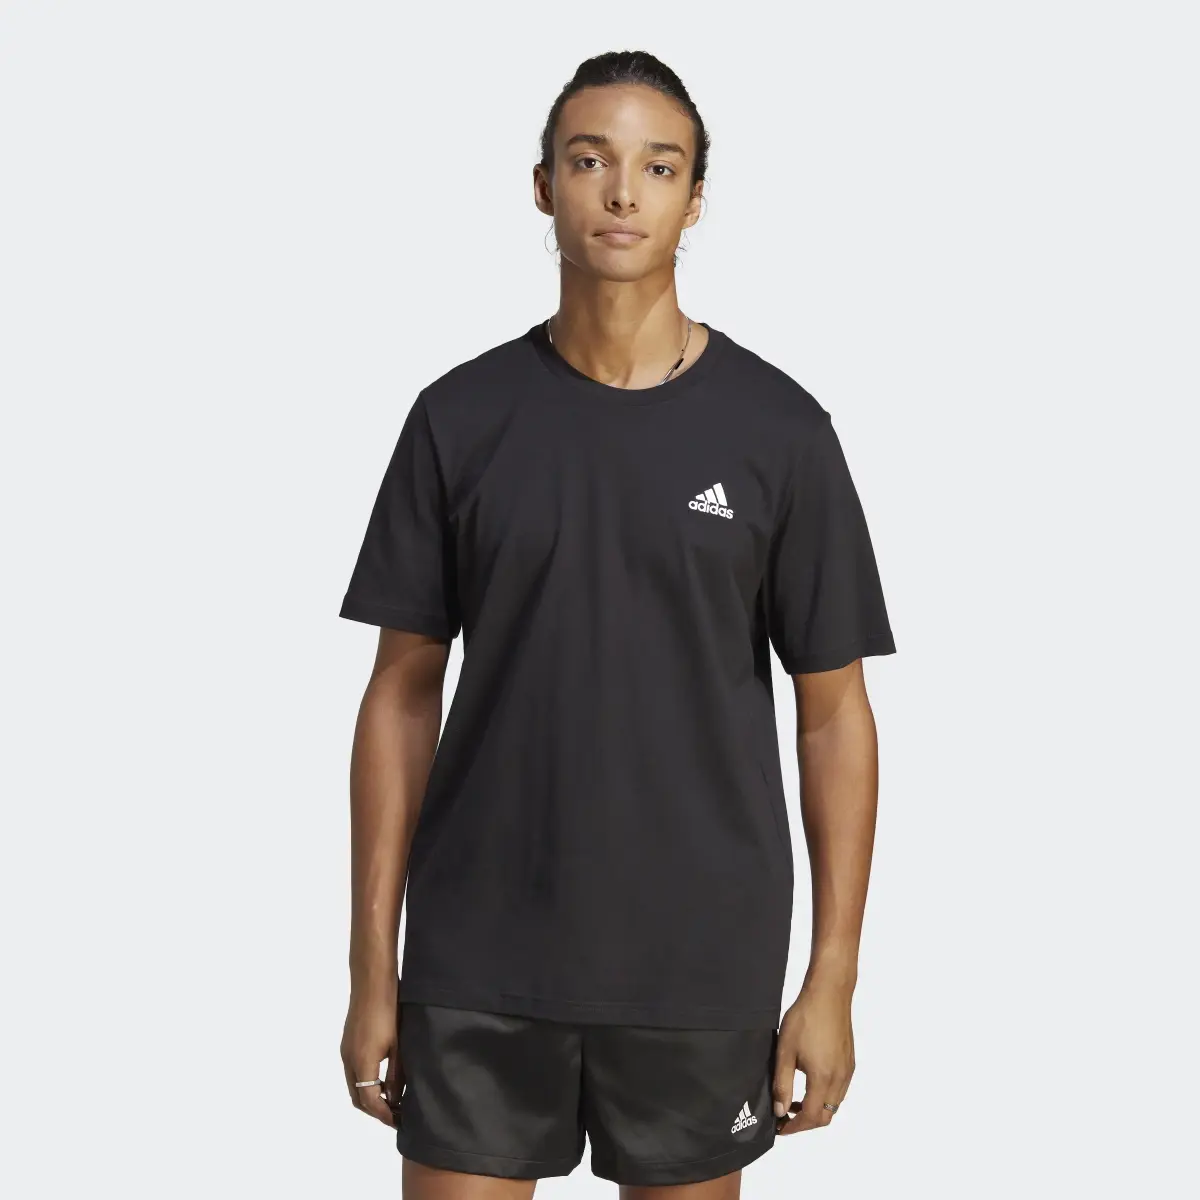 Adidas T-shirt Essentials Single Jersey Embroidered Small Logo. 2